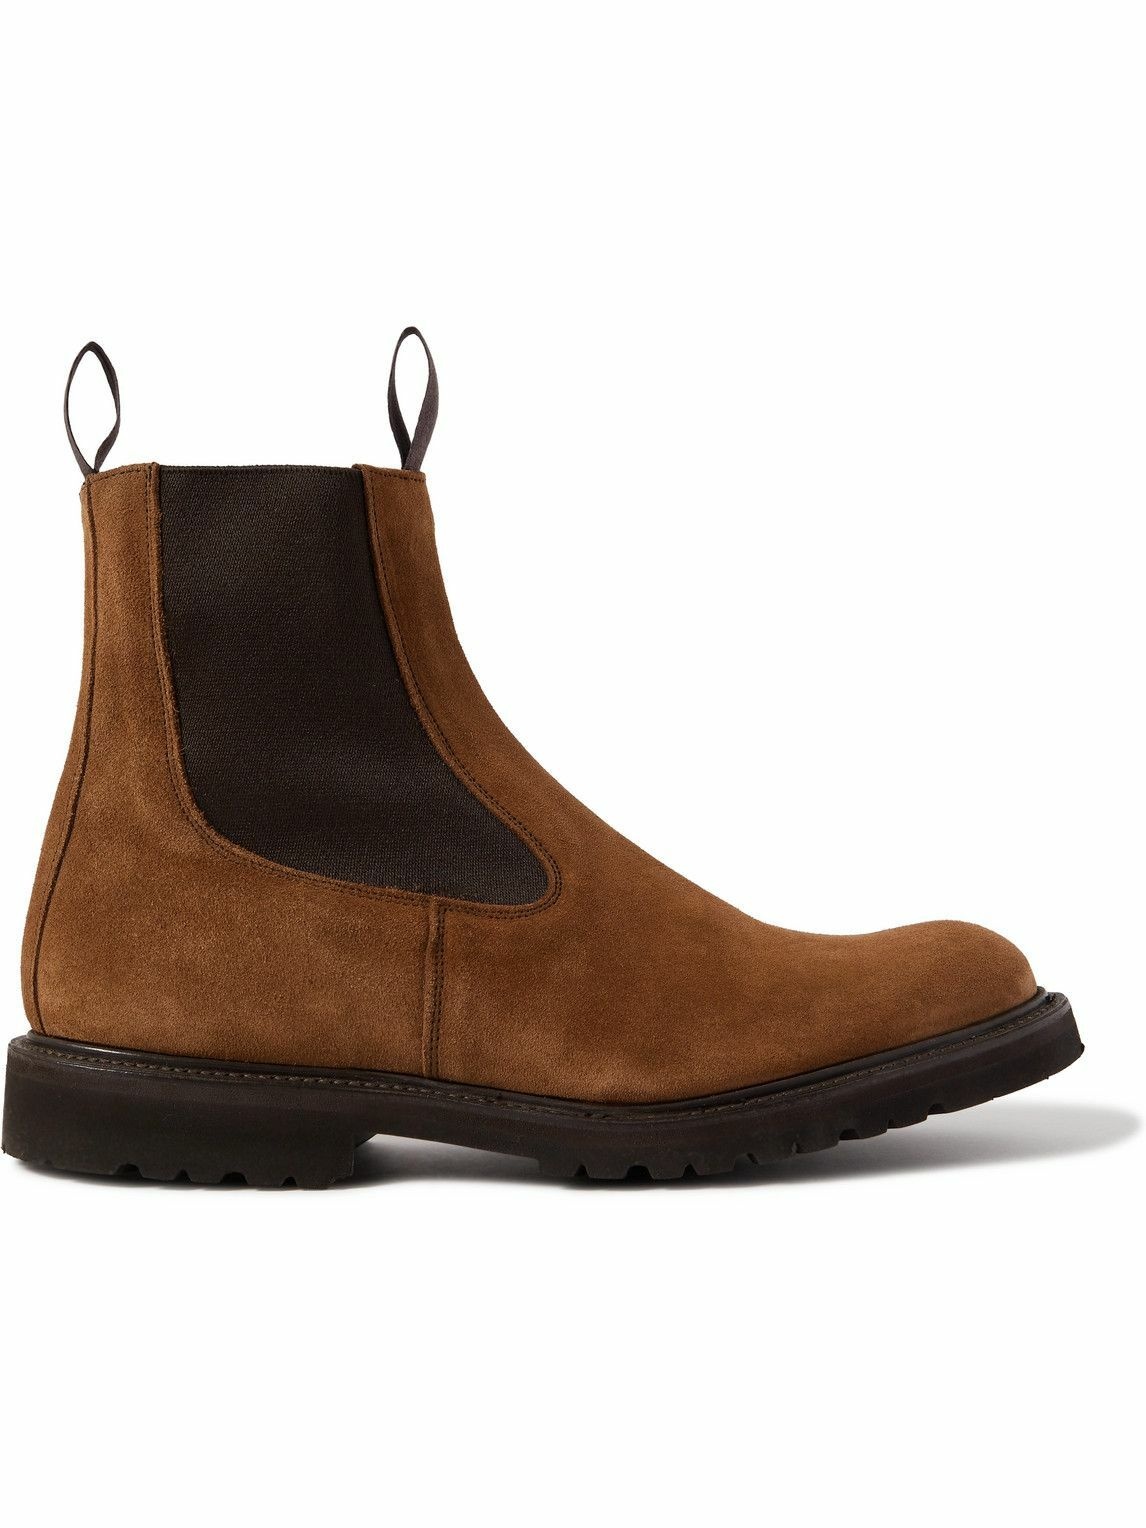 Tricker's - Henry Suede Chelsea Boots - Brown